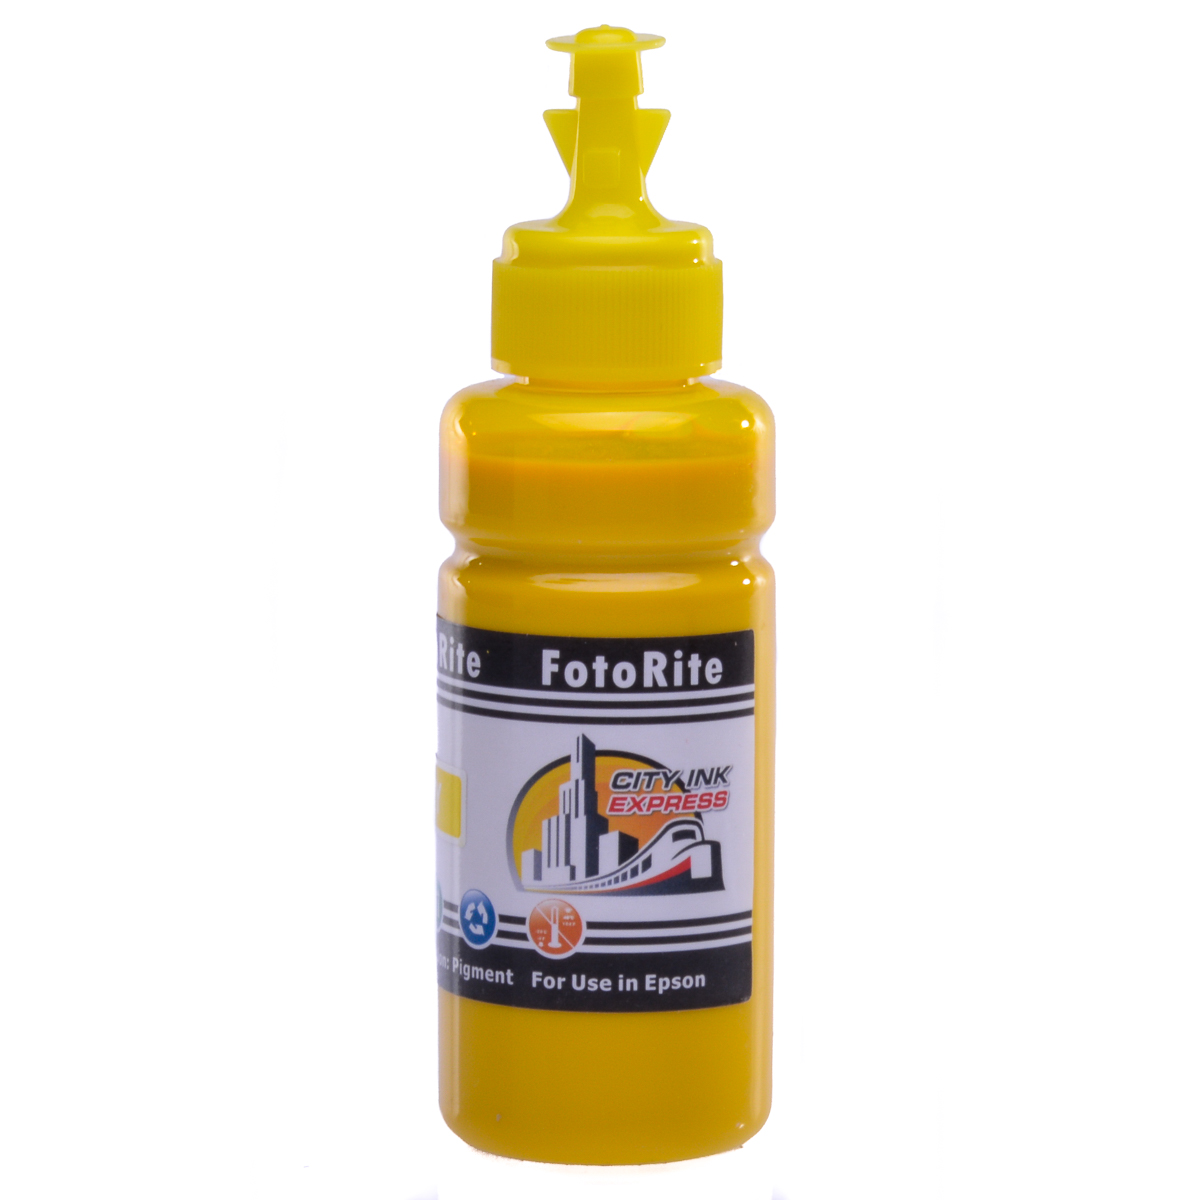 Cheap Yellow pigment ink replaces Epson WF-7710DWF - T2704